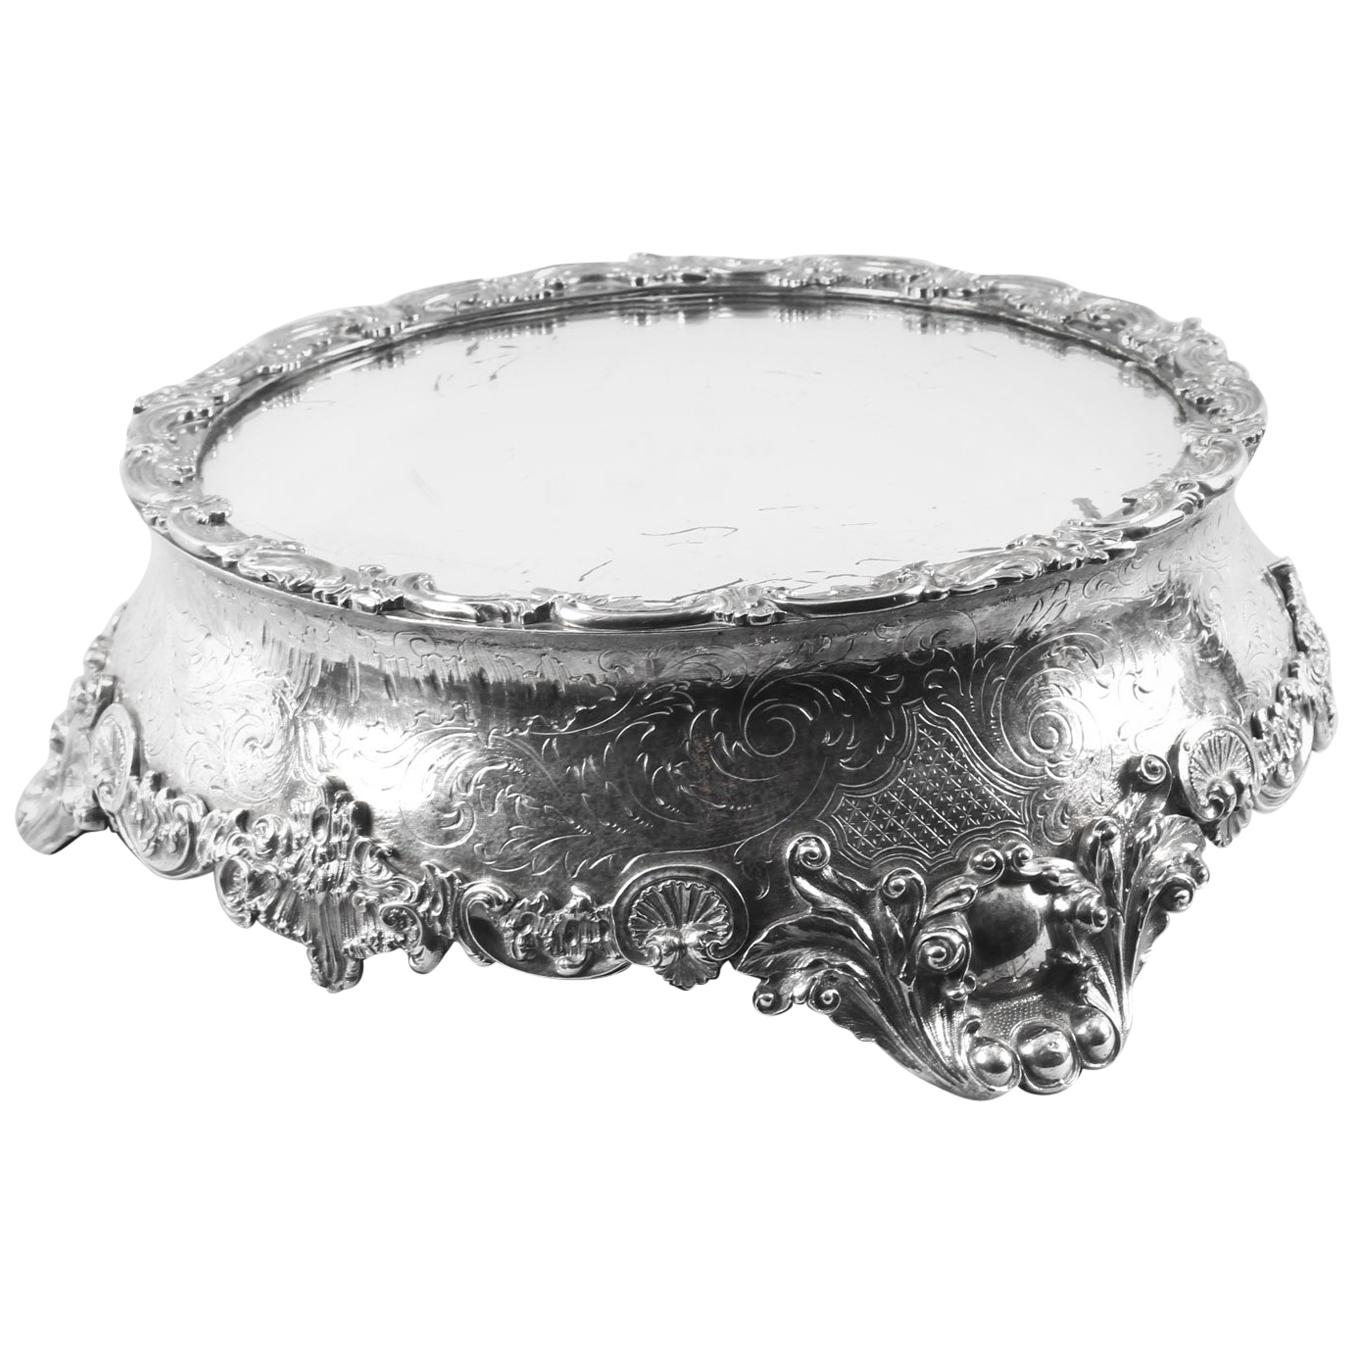 Antique English Silver Plated Mirrored Top Cake Stand, 19th Century